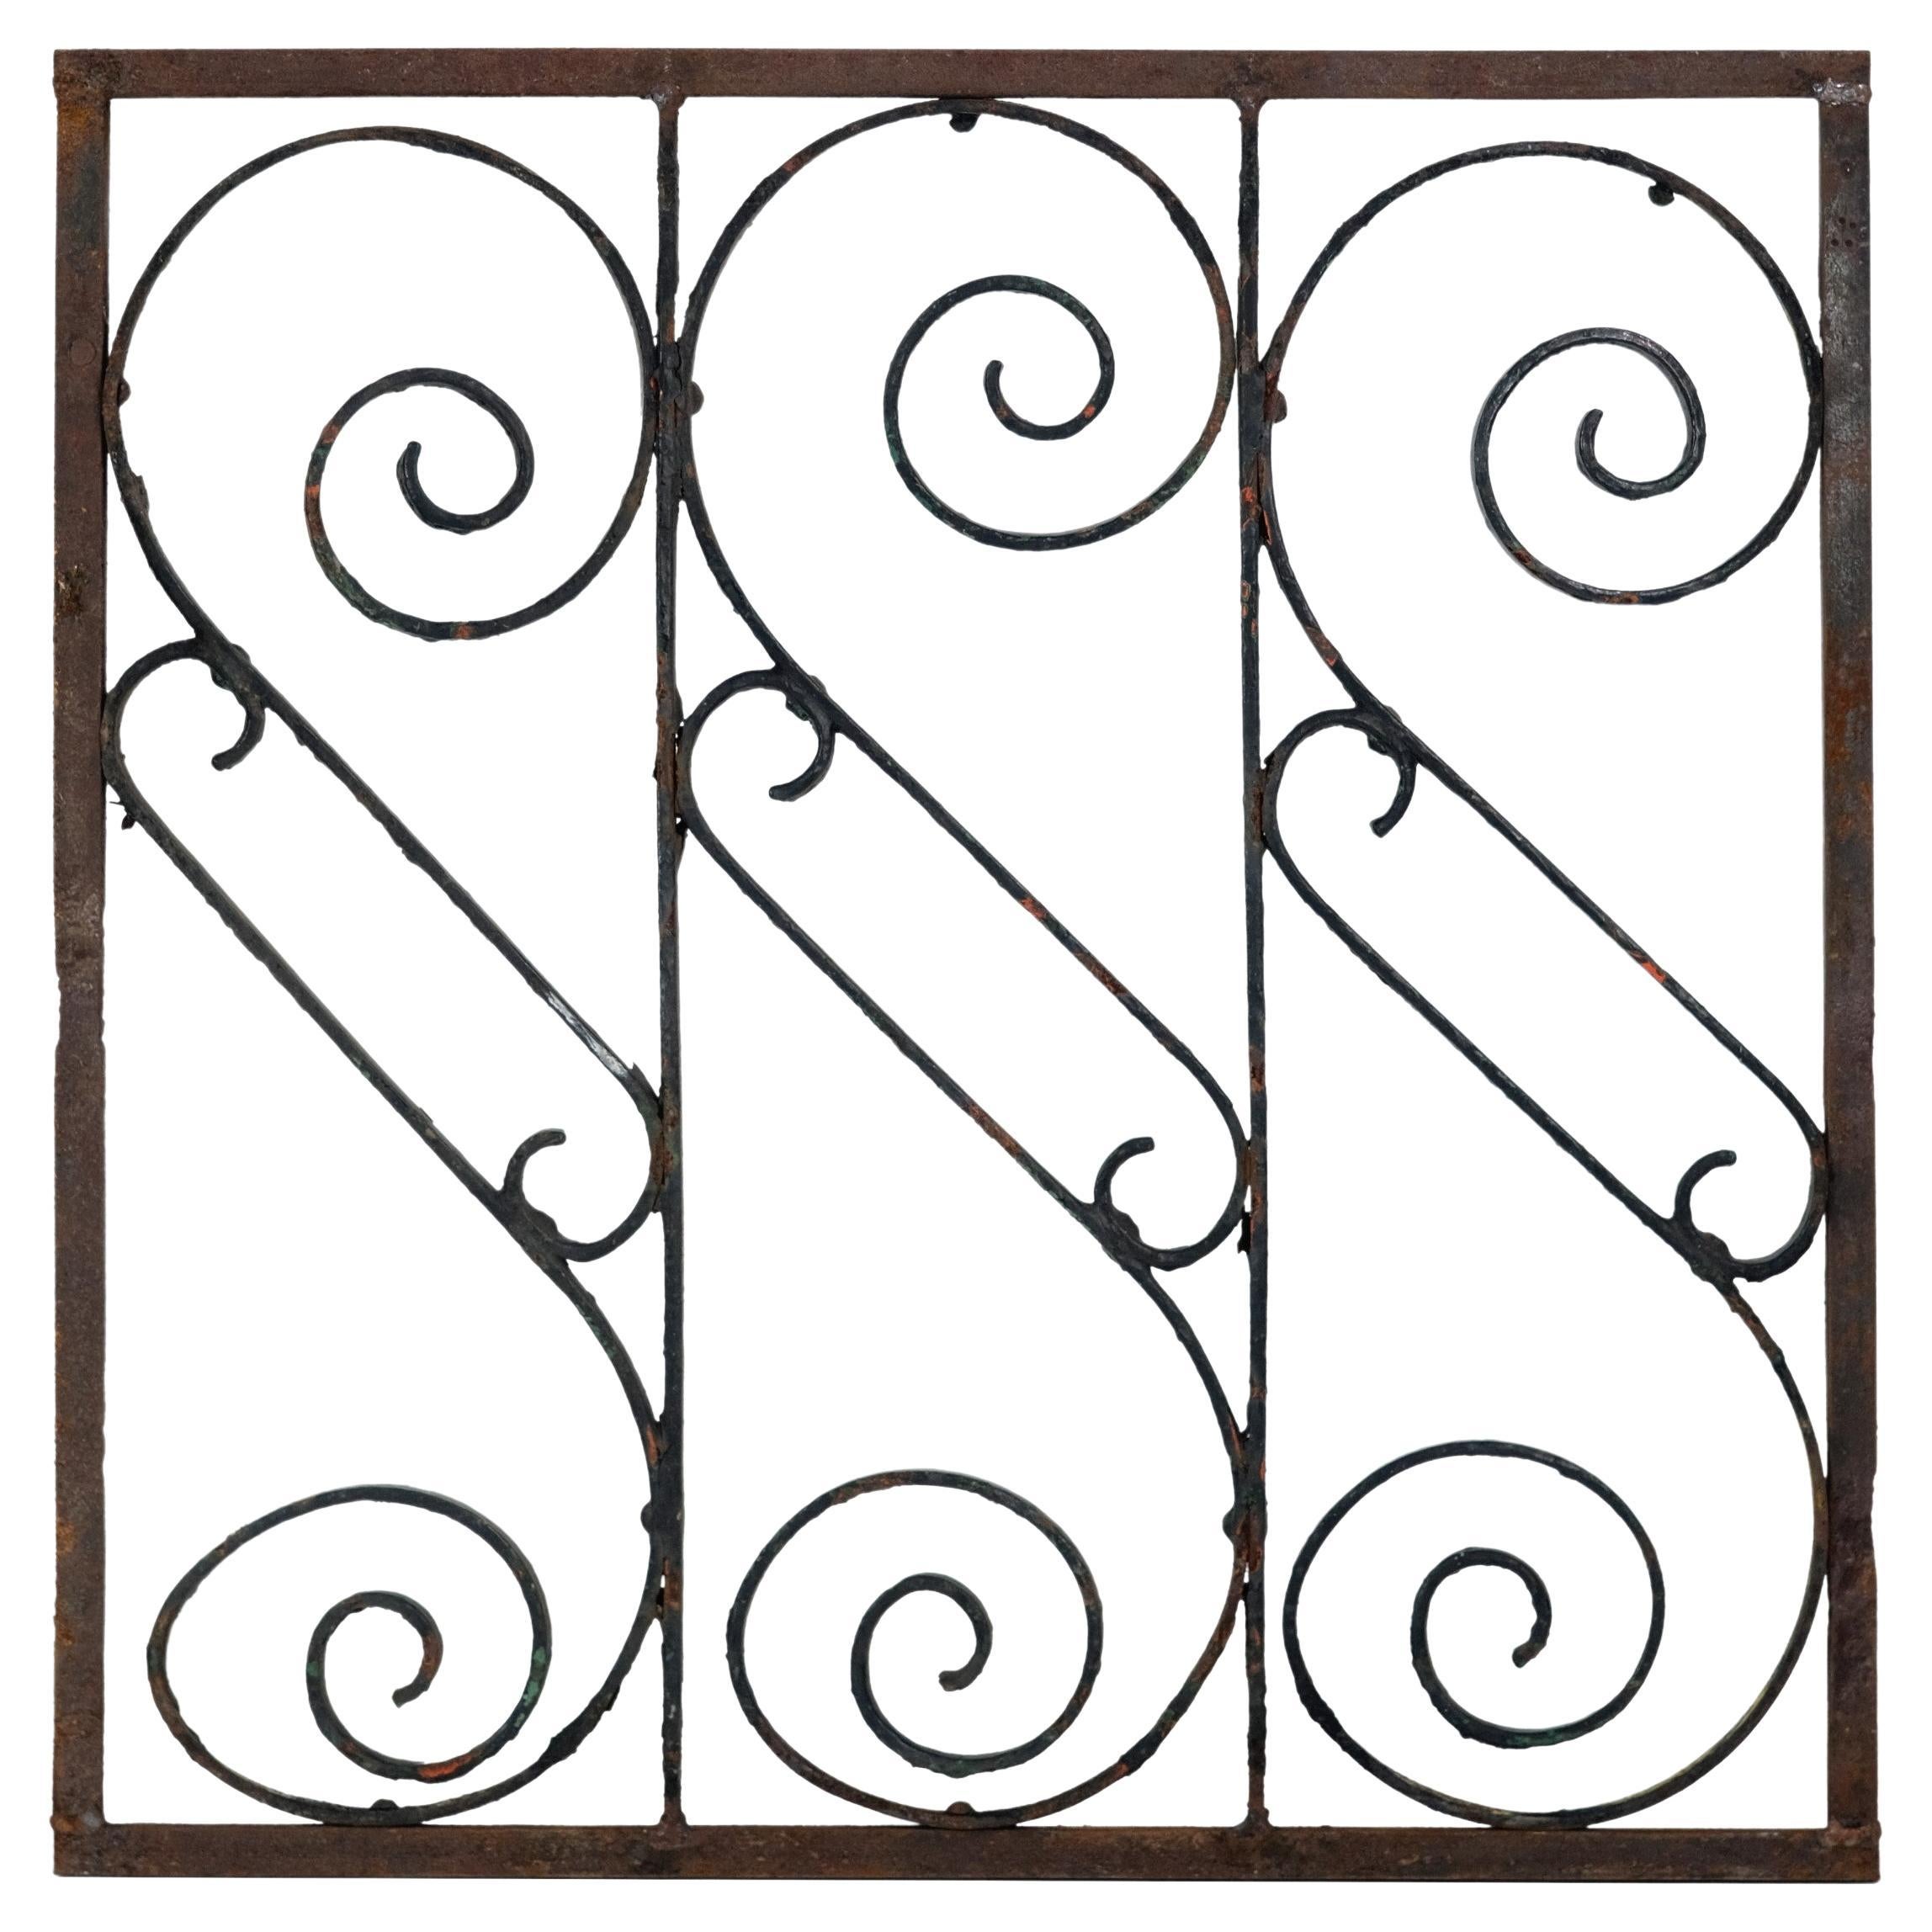 Wrought Iron S Curved Design Decorative Panel - Antique For Sale